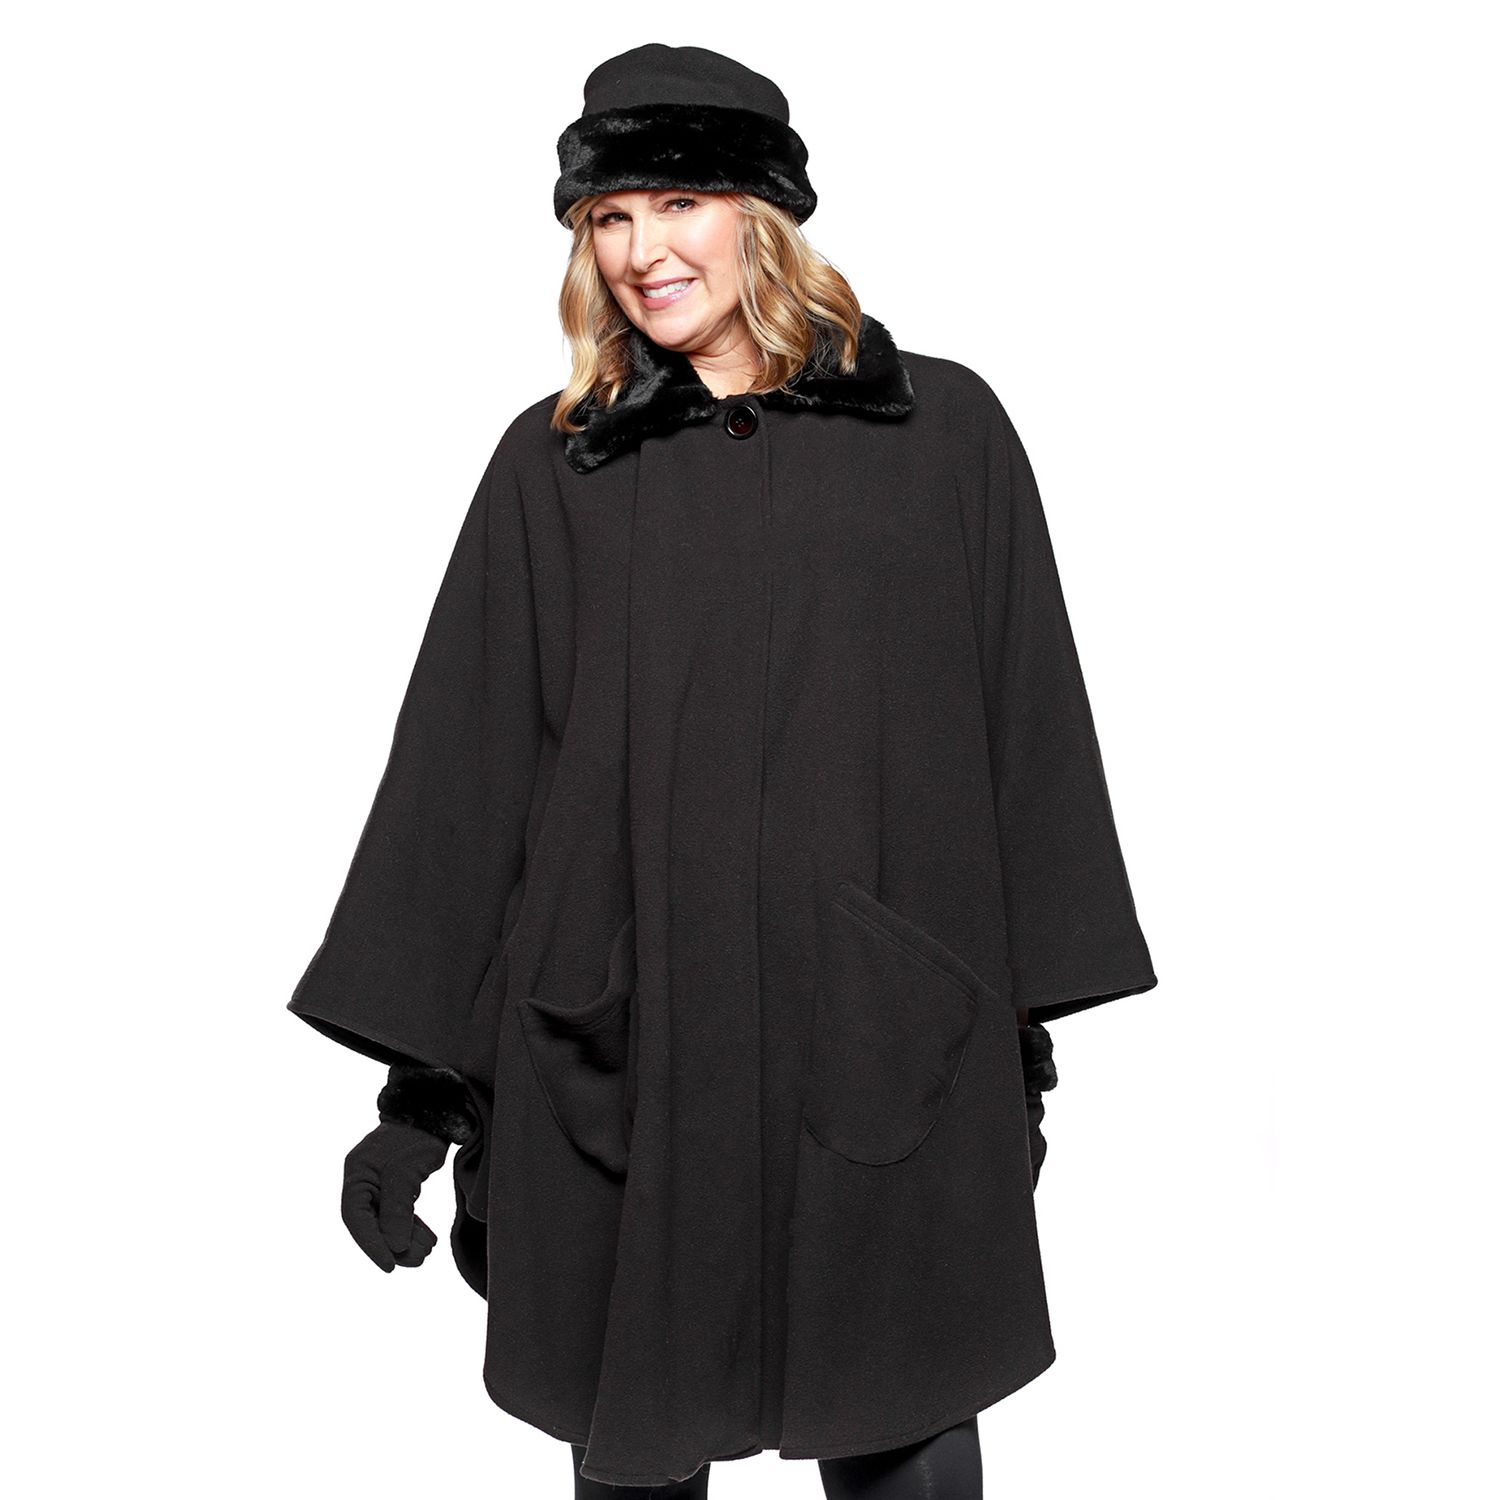 Image for Le Moda Women's Faux Fur Trim Polar Fleece Wrap with Matching Gloves & Hat at Kohl's.